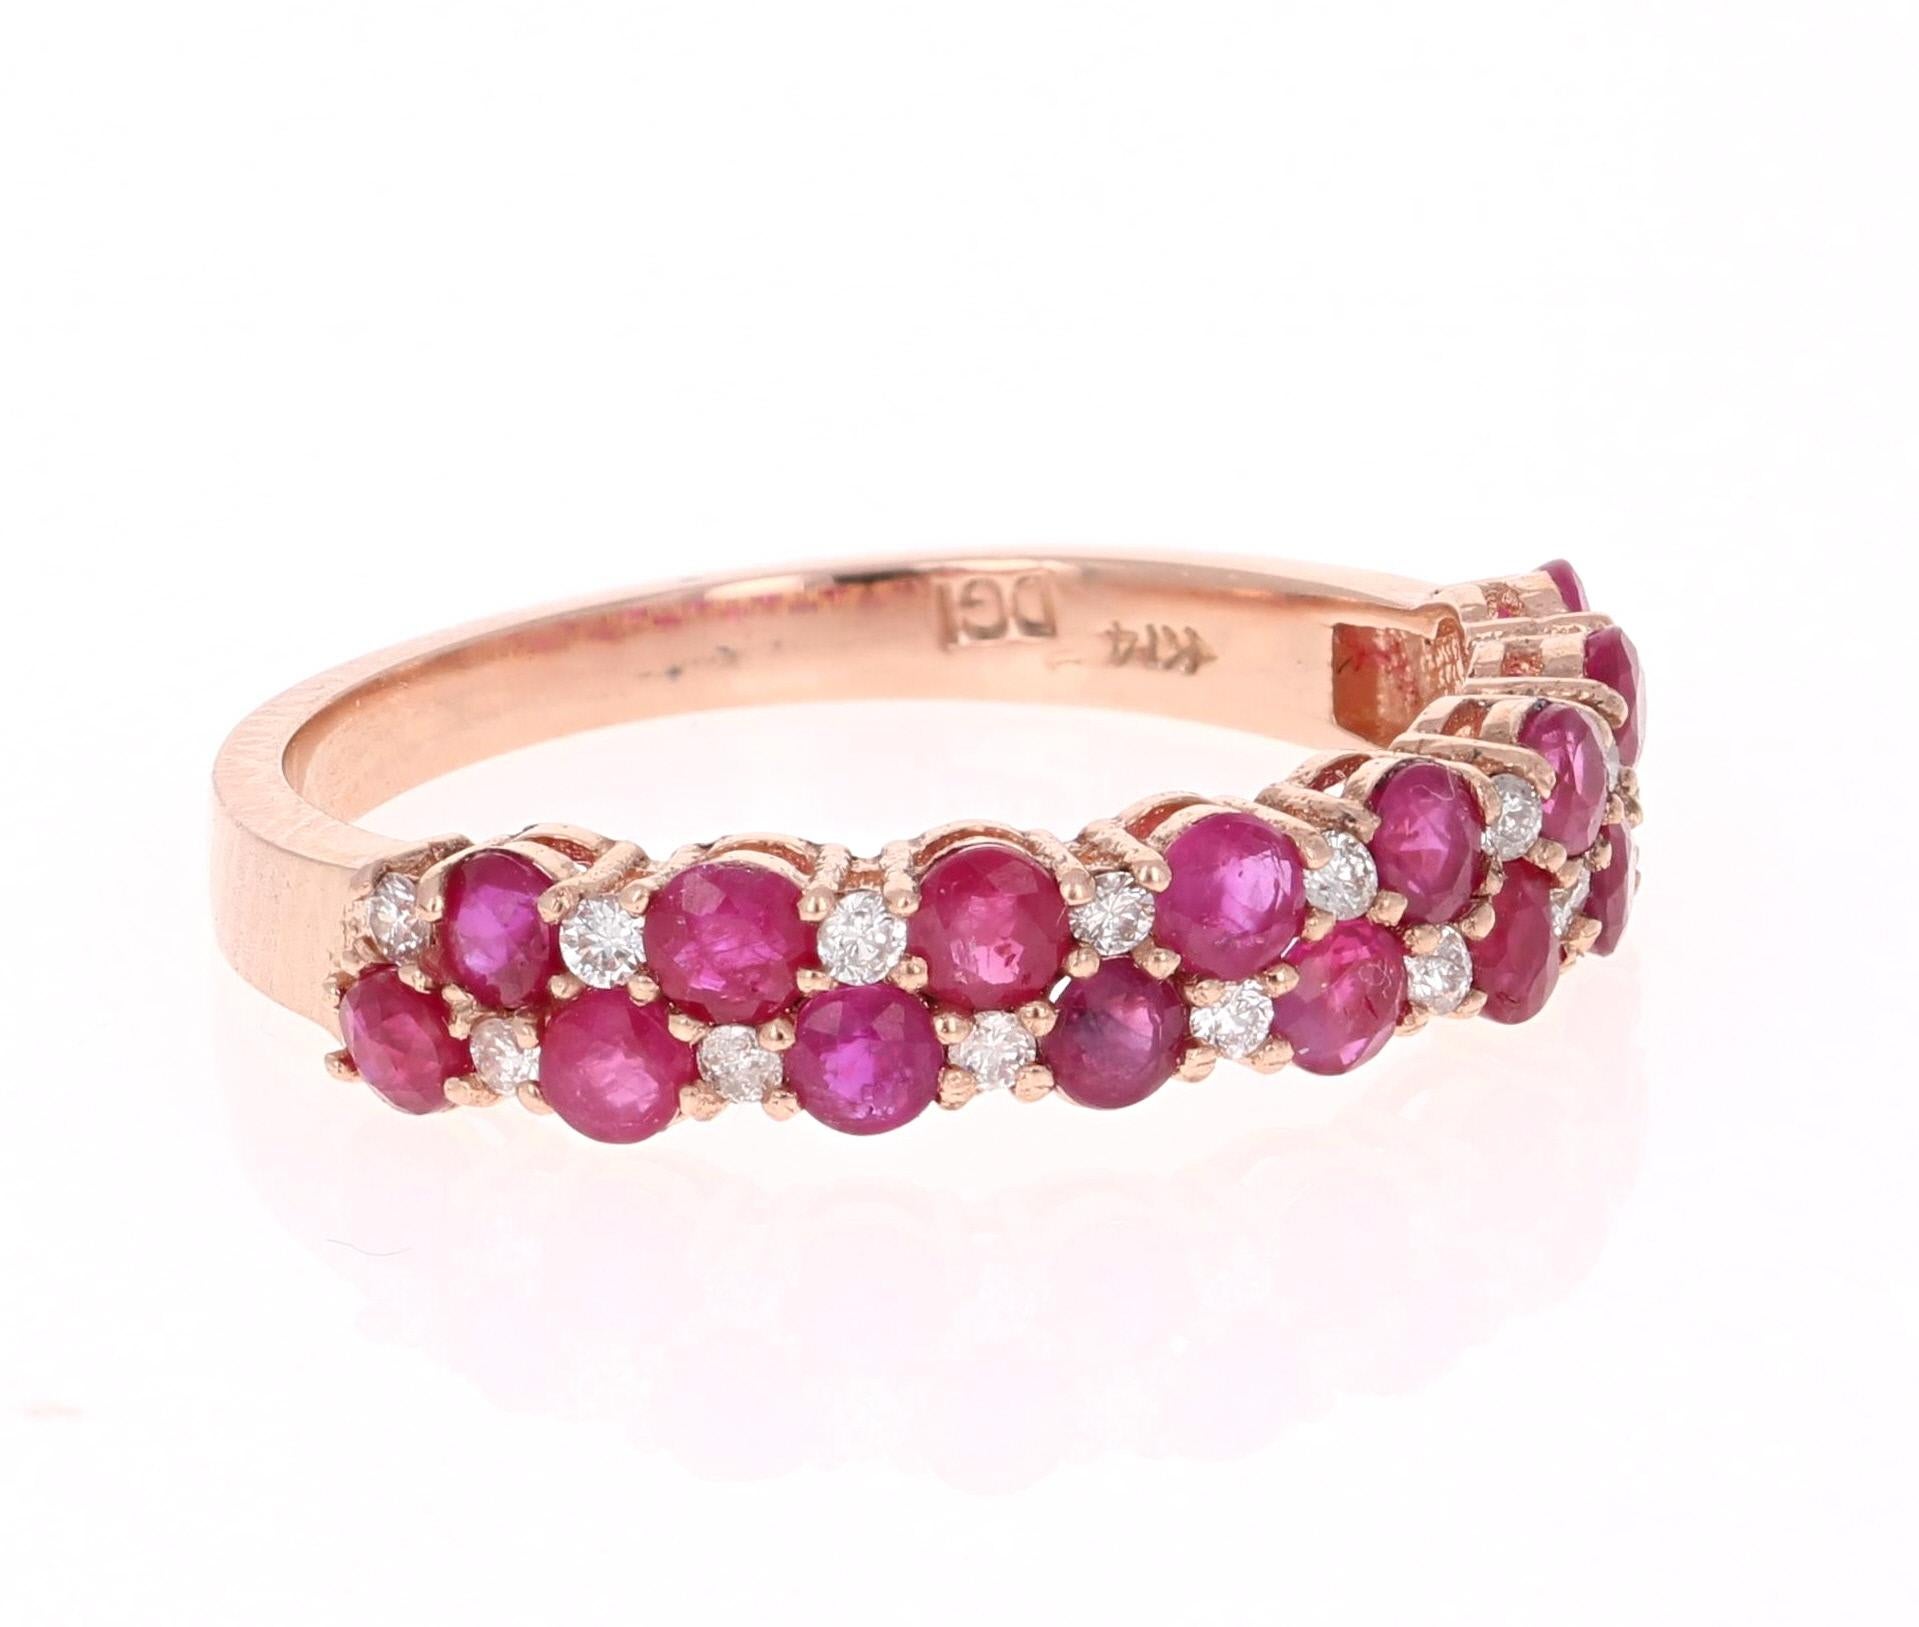 Cute and dainty Ruby and Diamond band that is sure to be a great addition to anyone's accessory collection. There are 16 Round Cut Rubies that weigh 1.30 carats and 16 Round Cut Diamonds that weigh 0.60 carats. The total carat weight of the band is